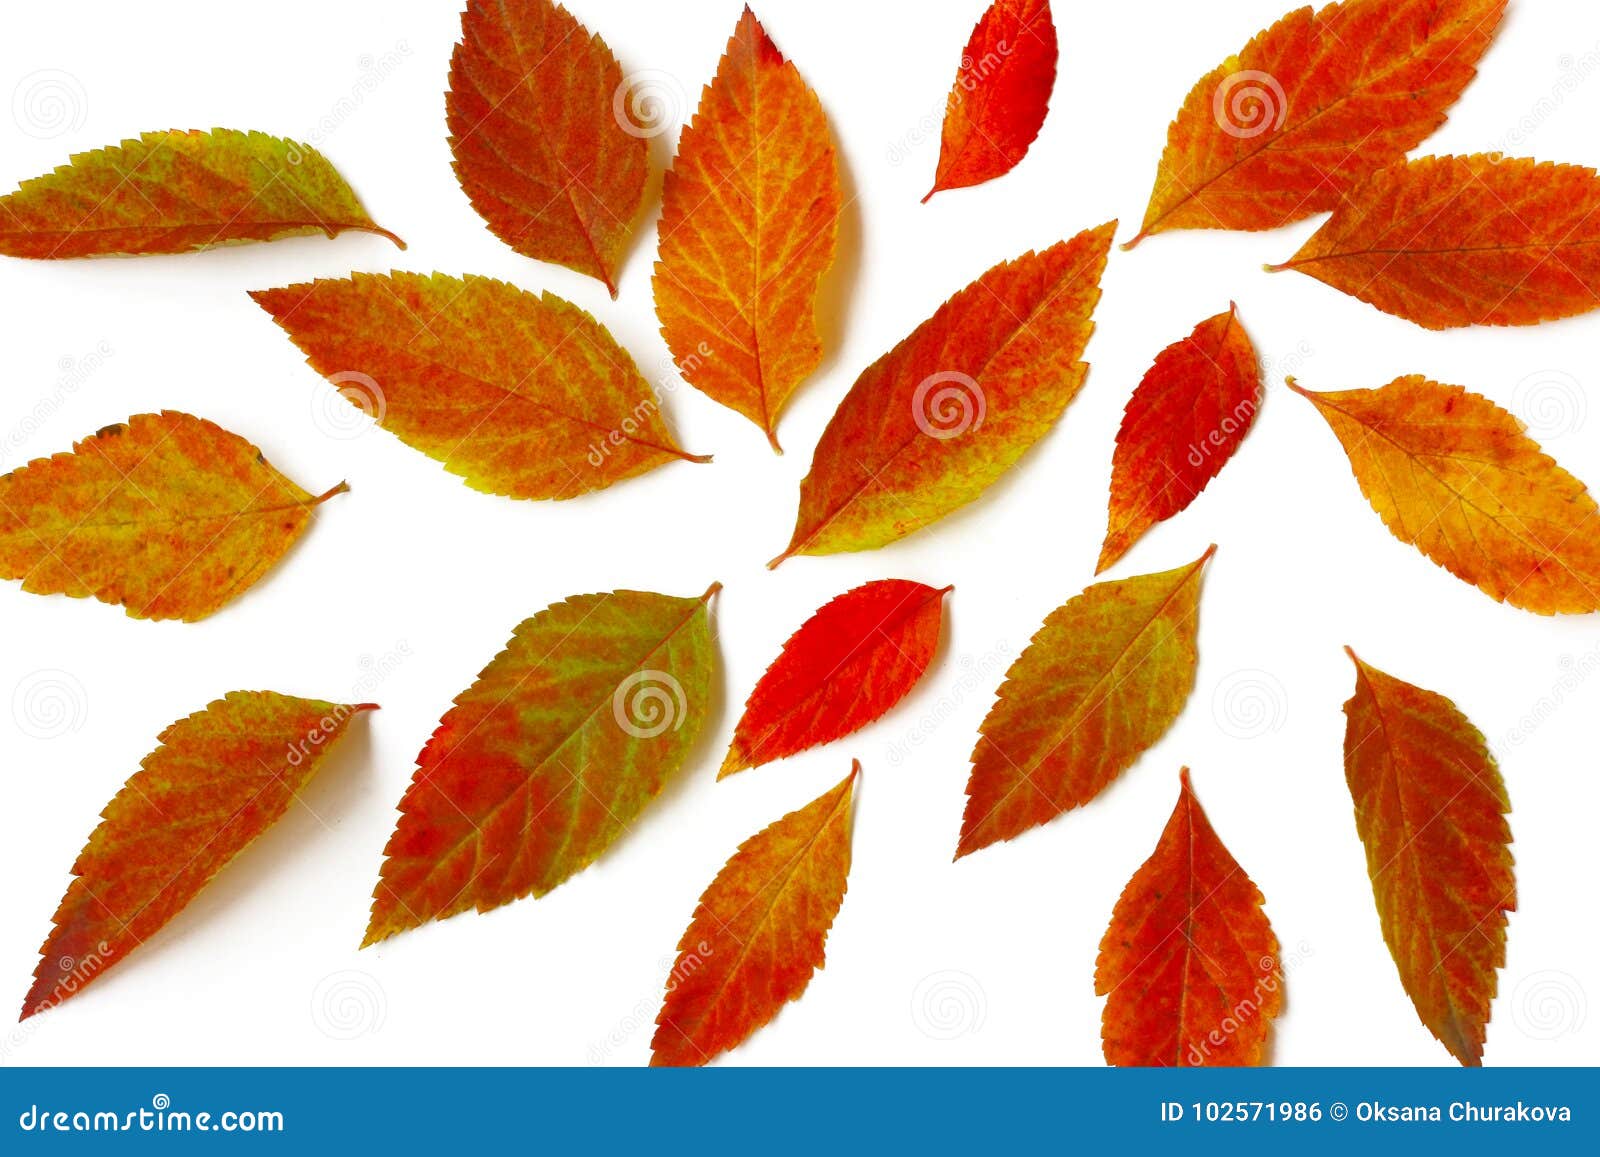 Randomly Scattered Bright Autumn Leaves Stock Photo - Image of ...